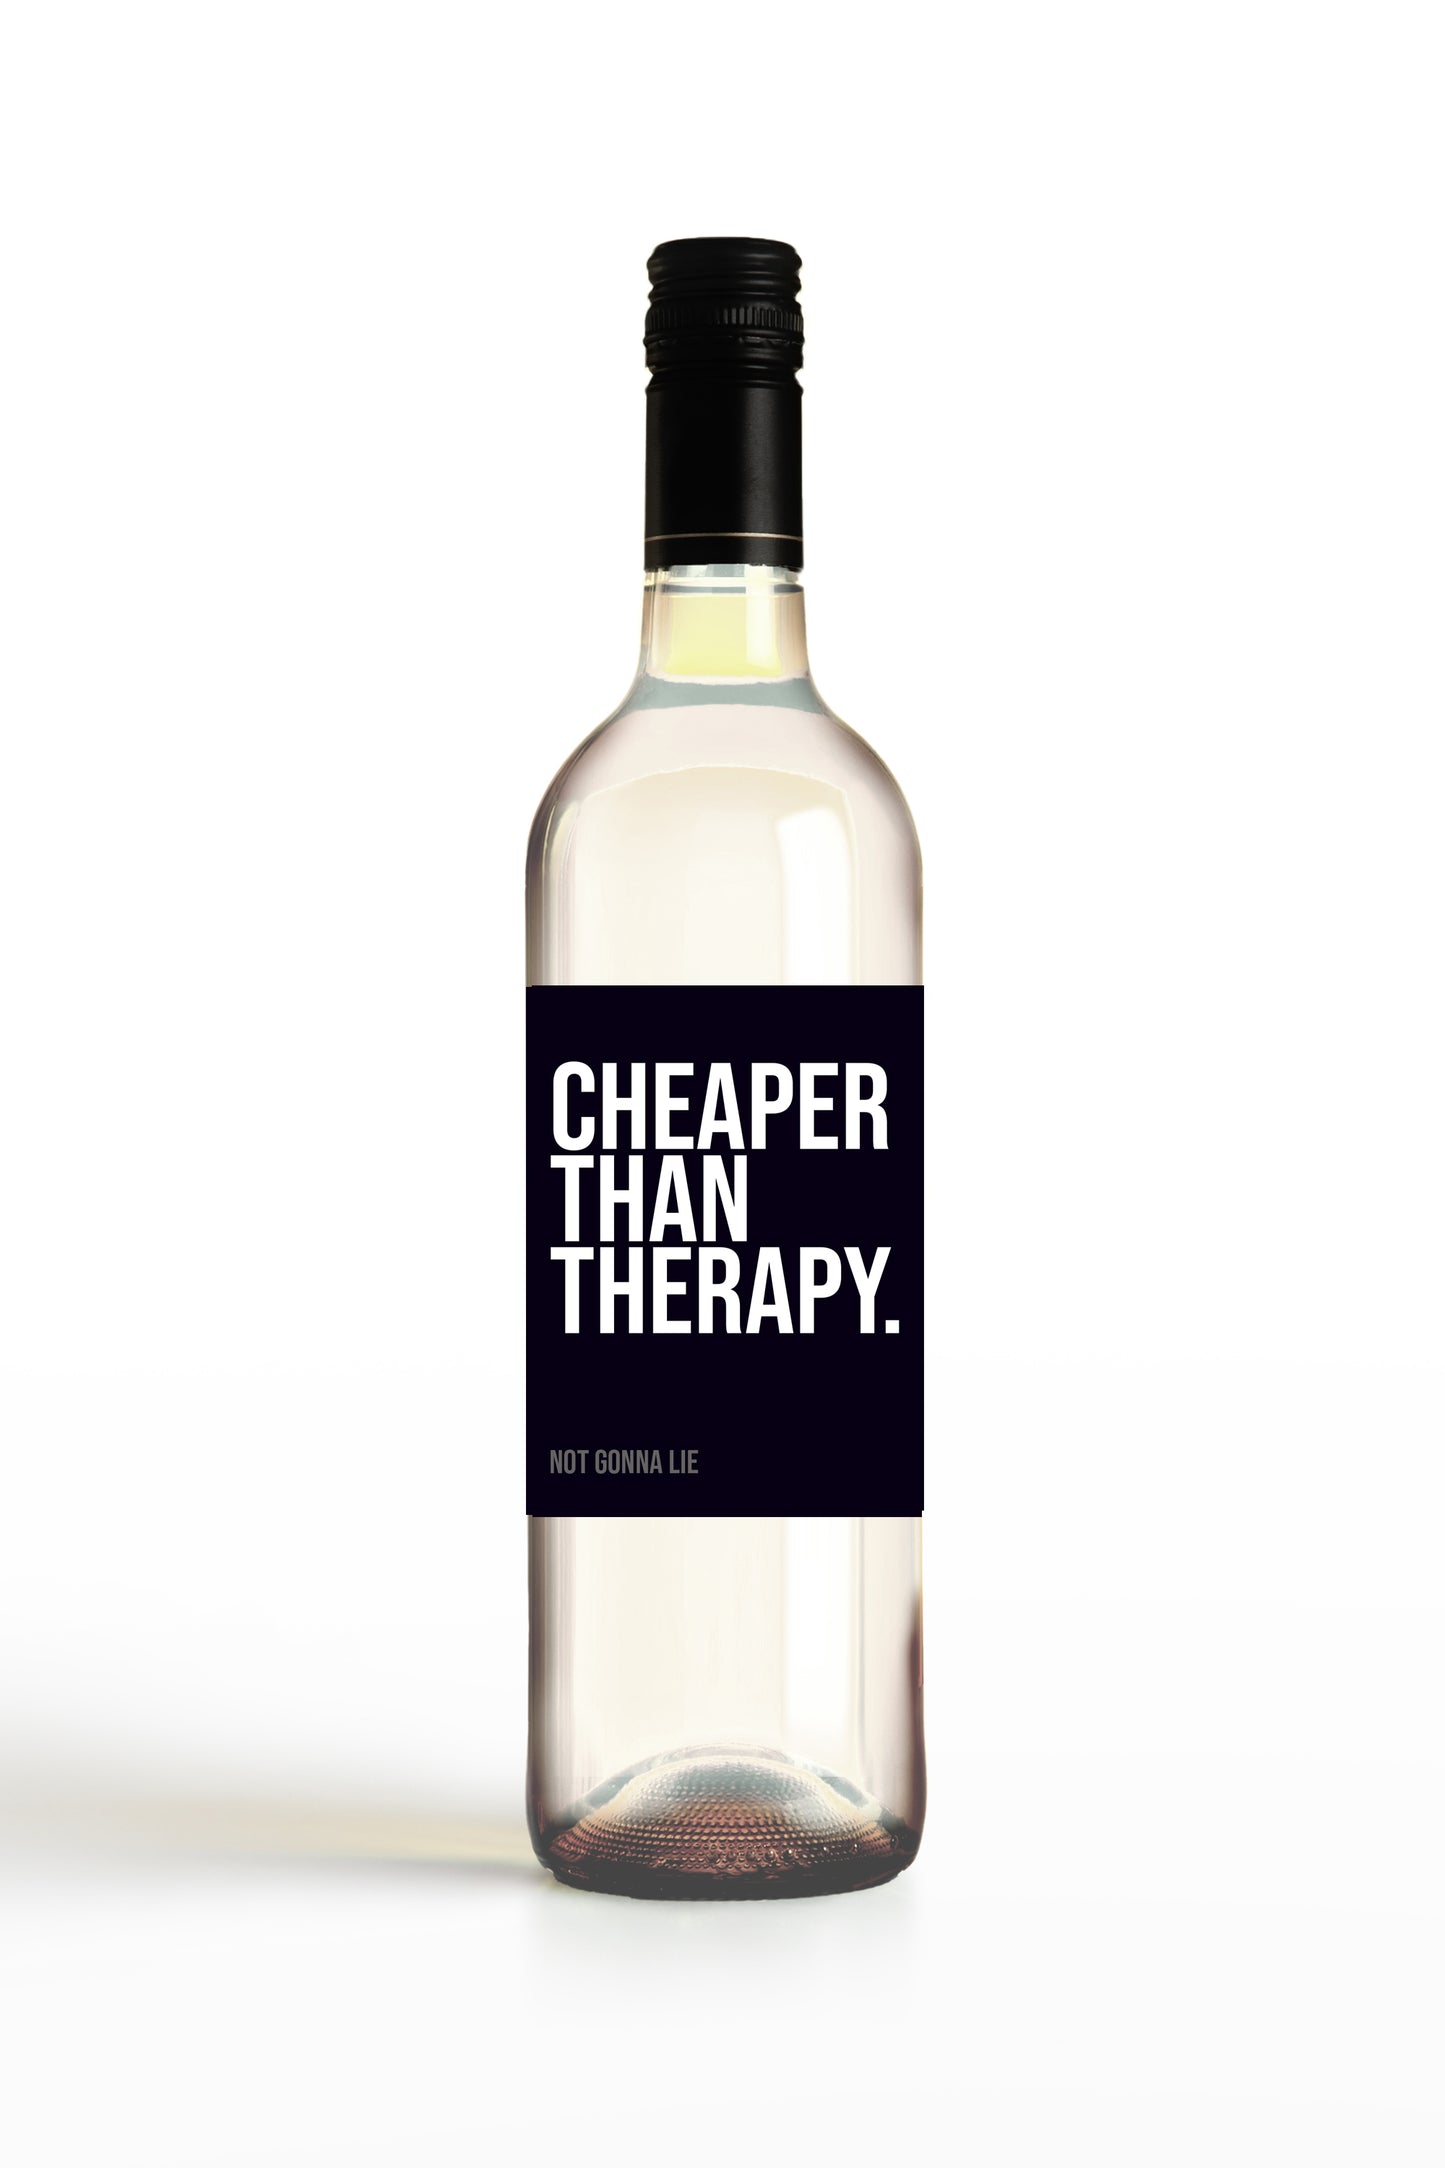 Cheaper Than Therapy.